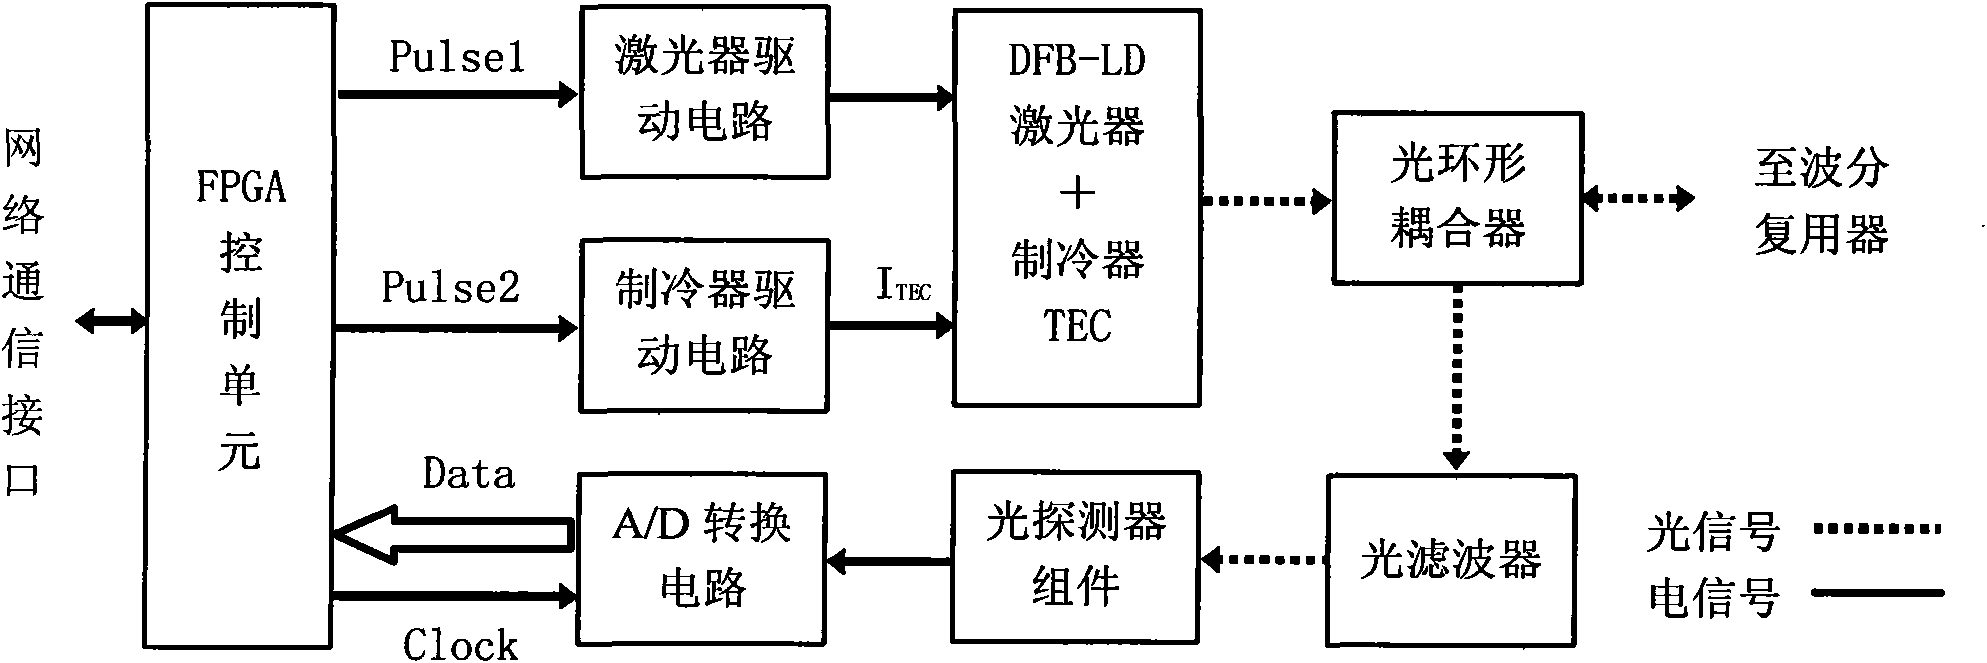 On-line optical cable monitoring method